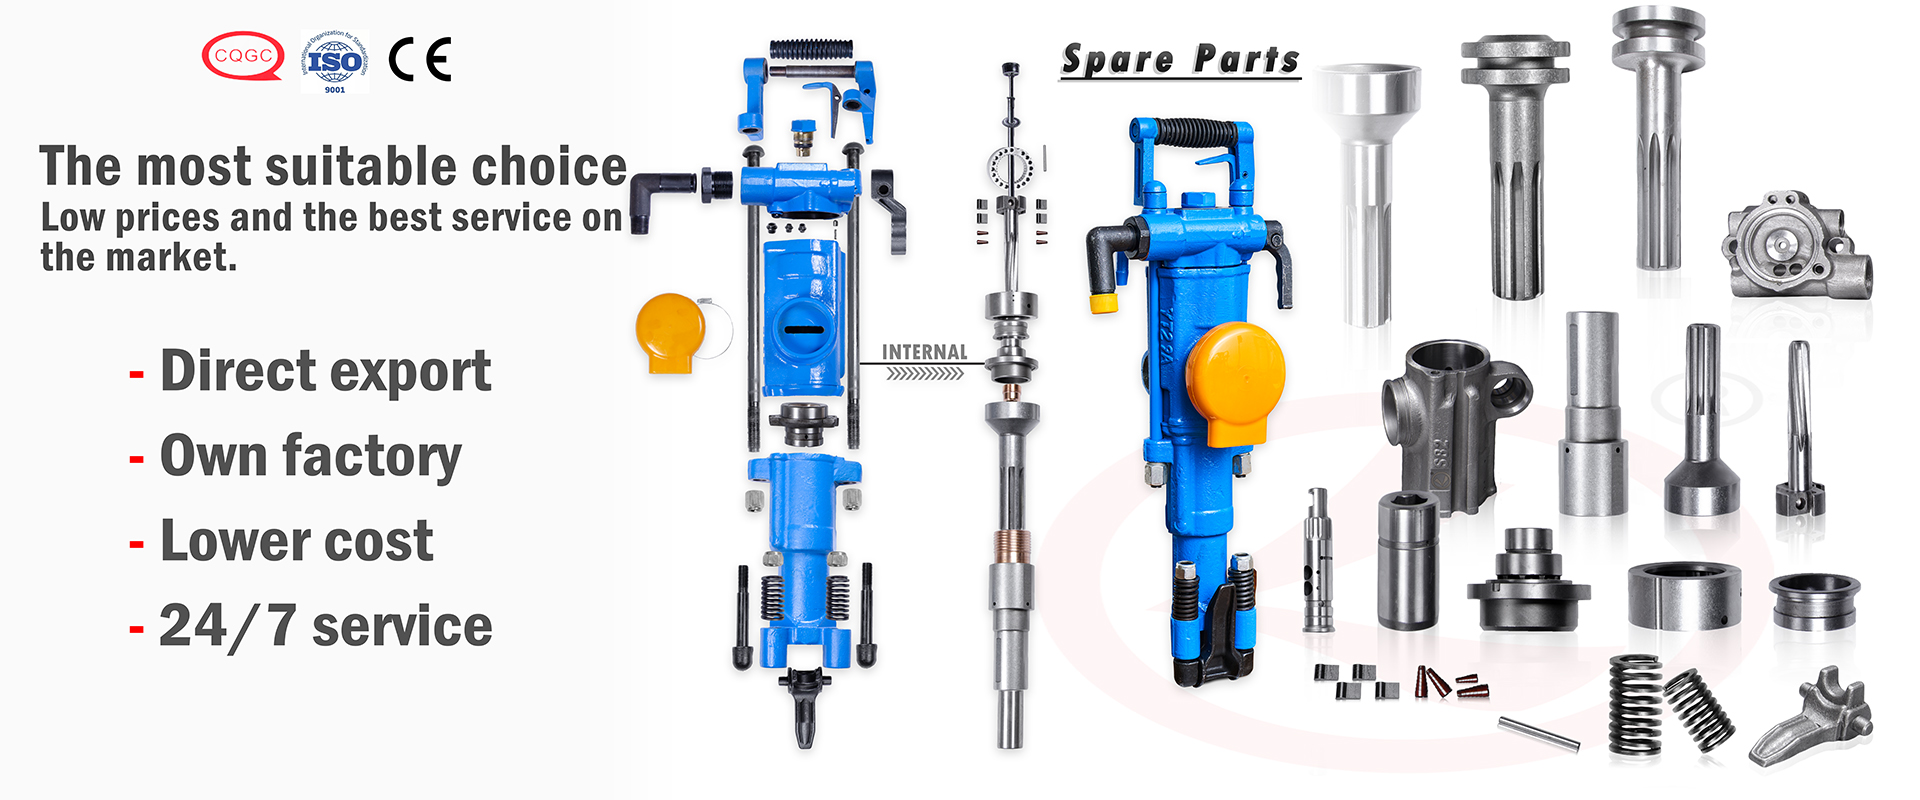 shenli supply all air pick rock drills Spare parts